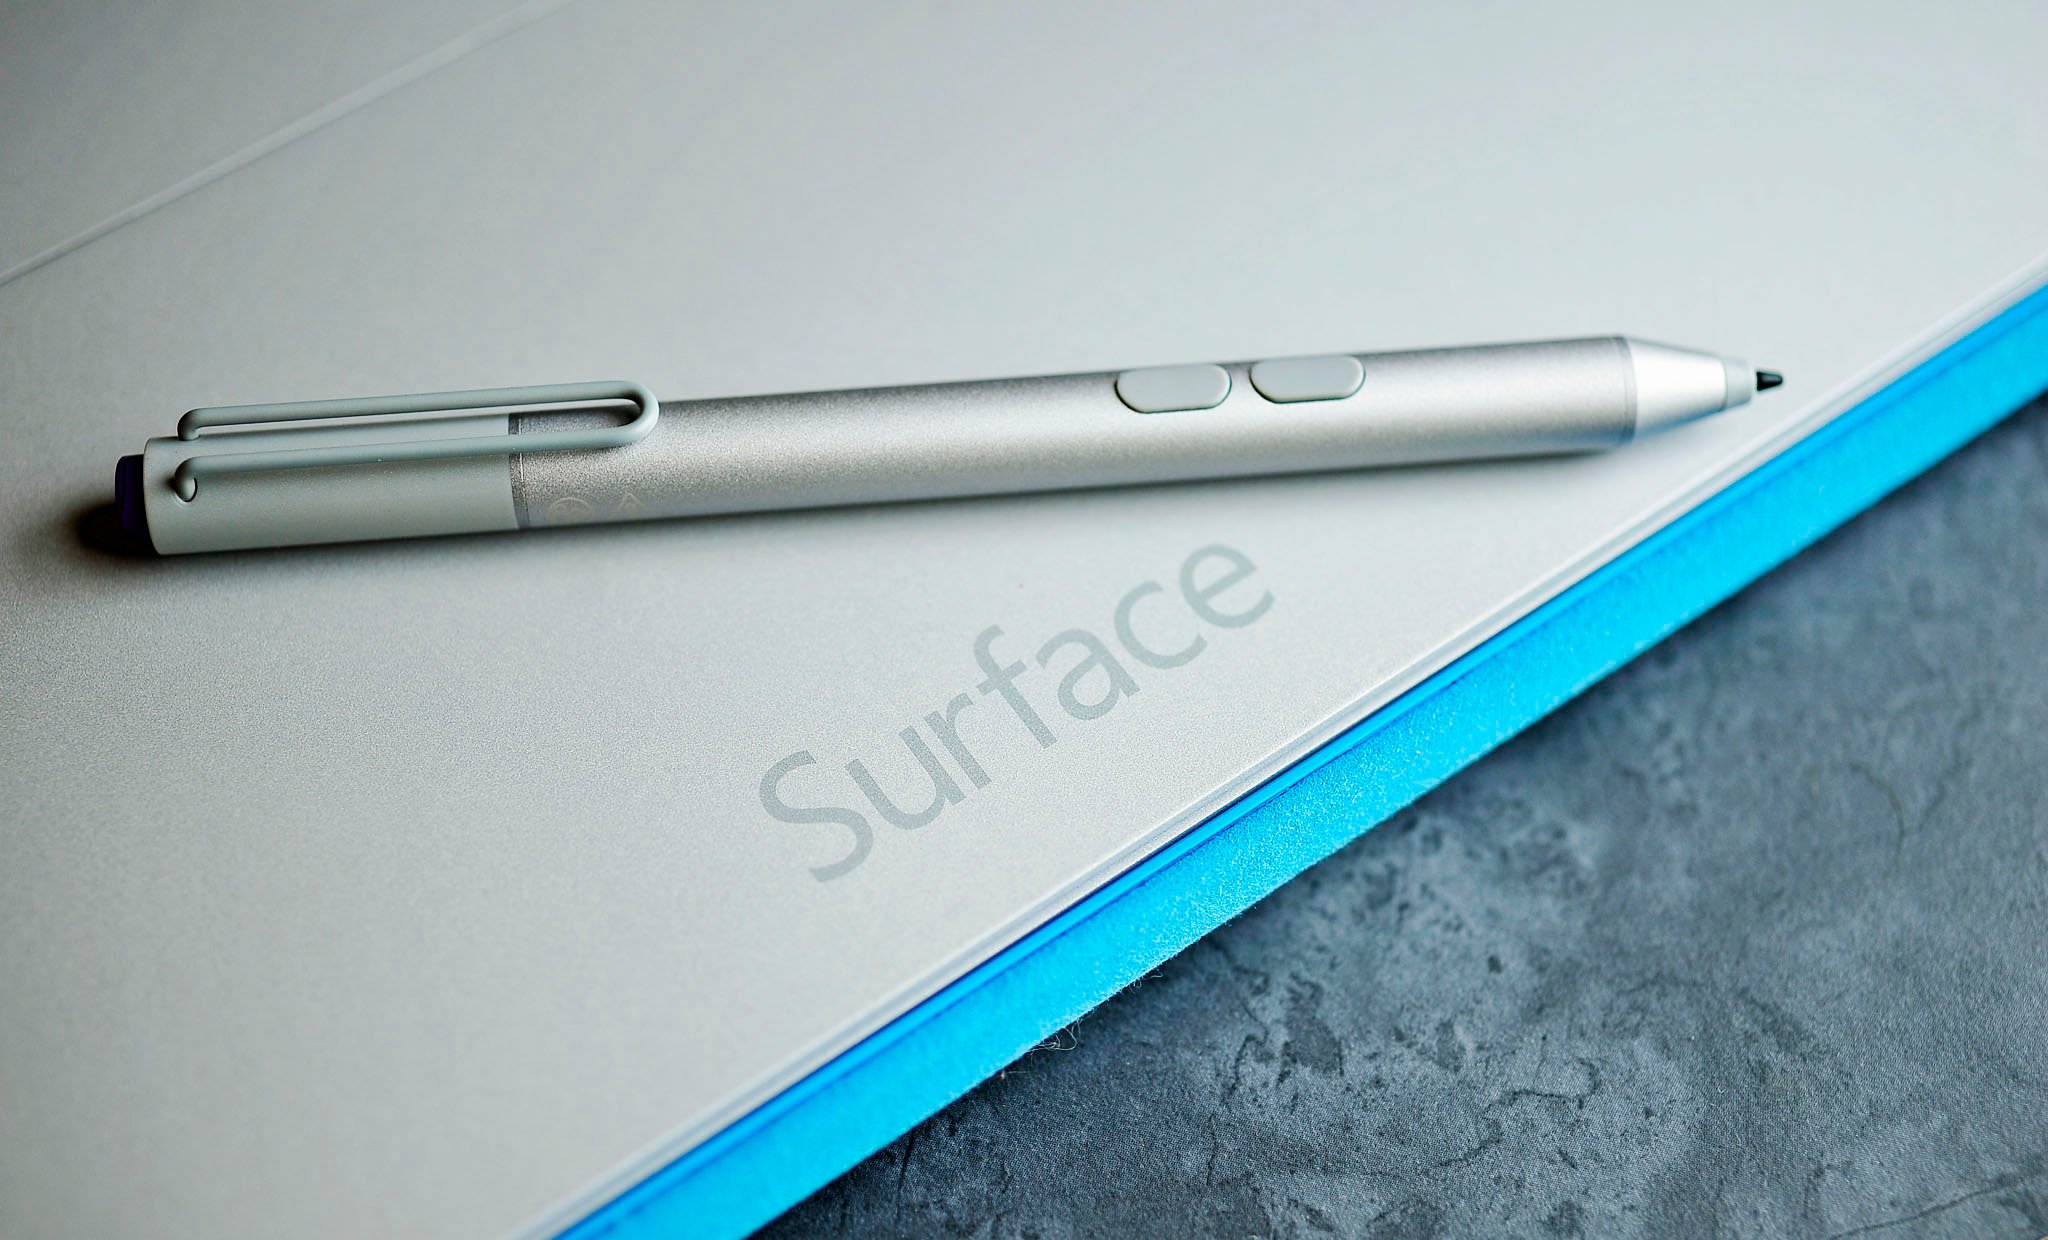 Microsoft readying some fixes for the Surface Pro 3 ahead of launch